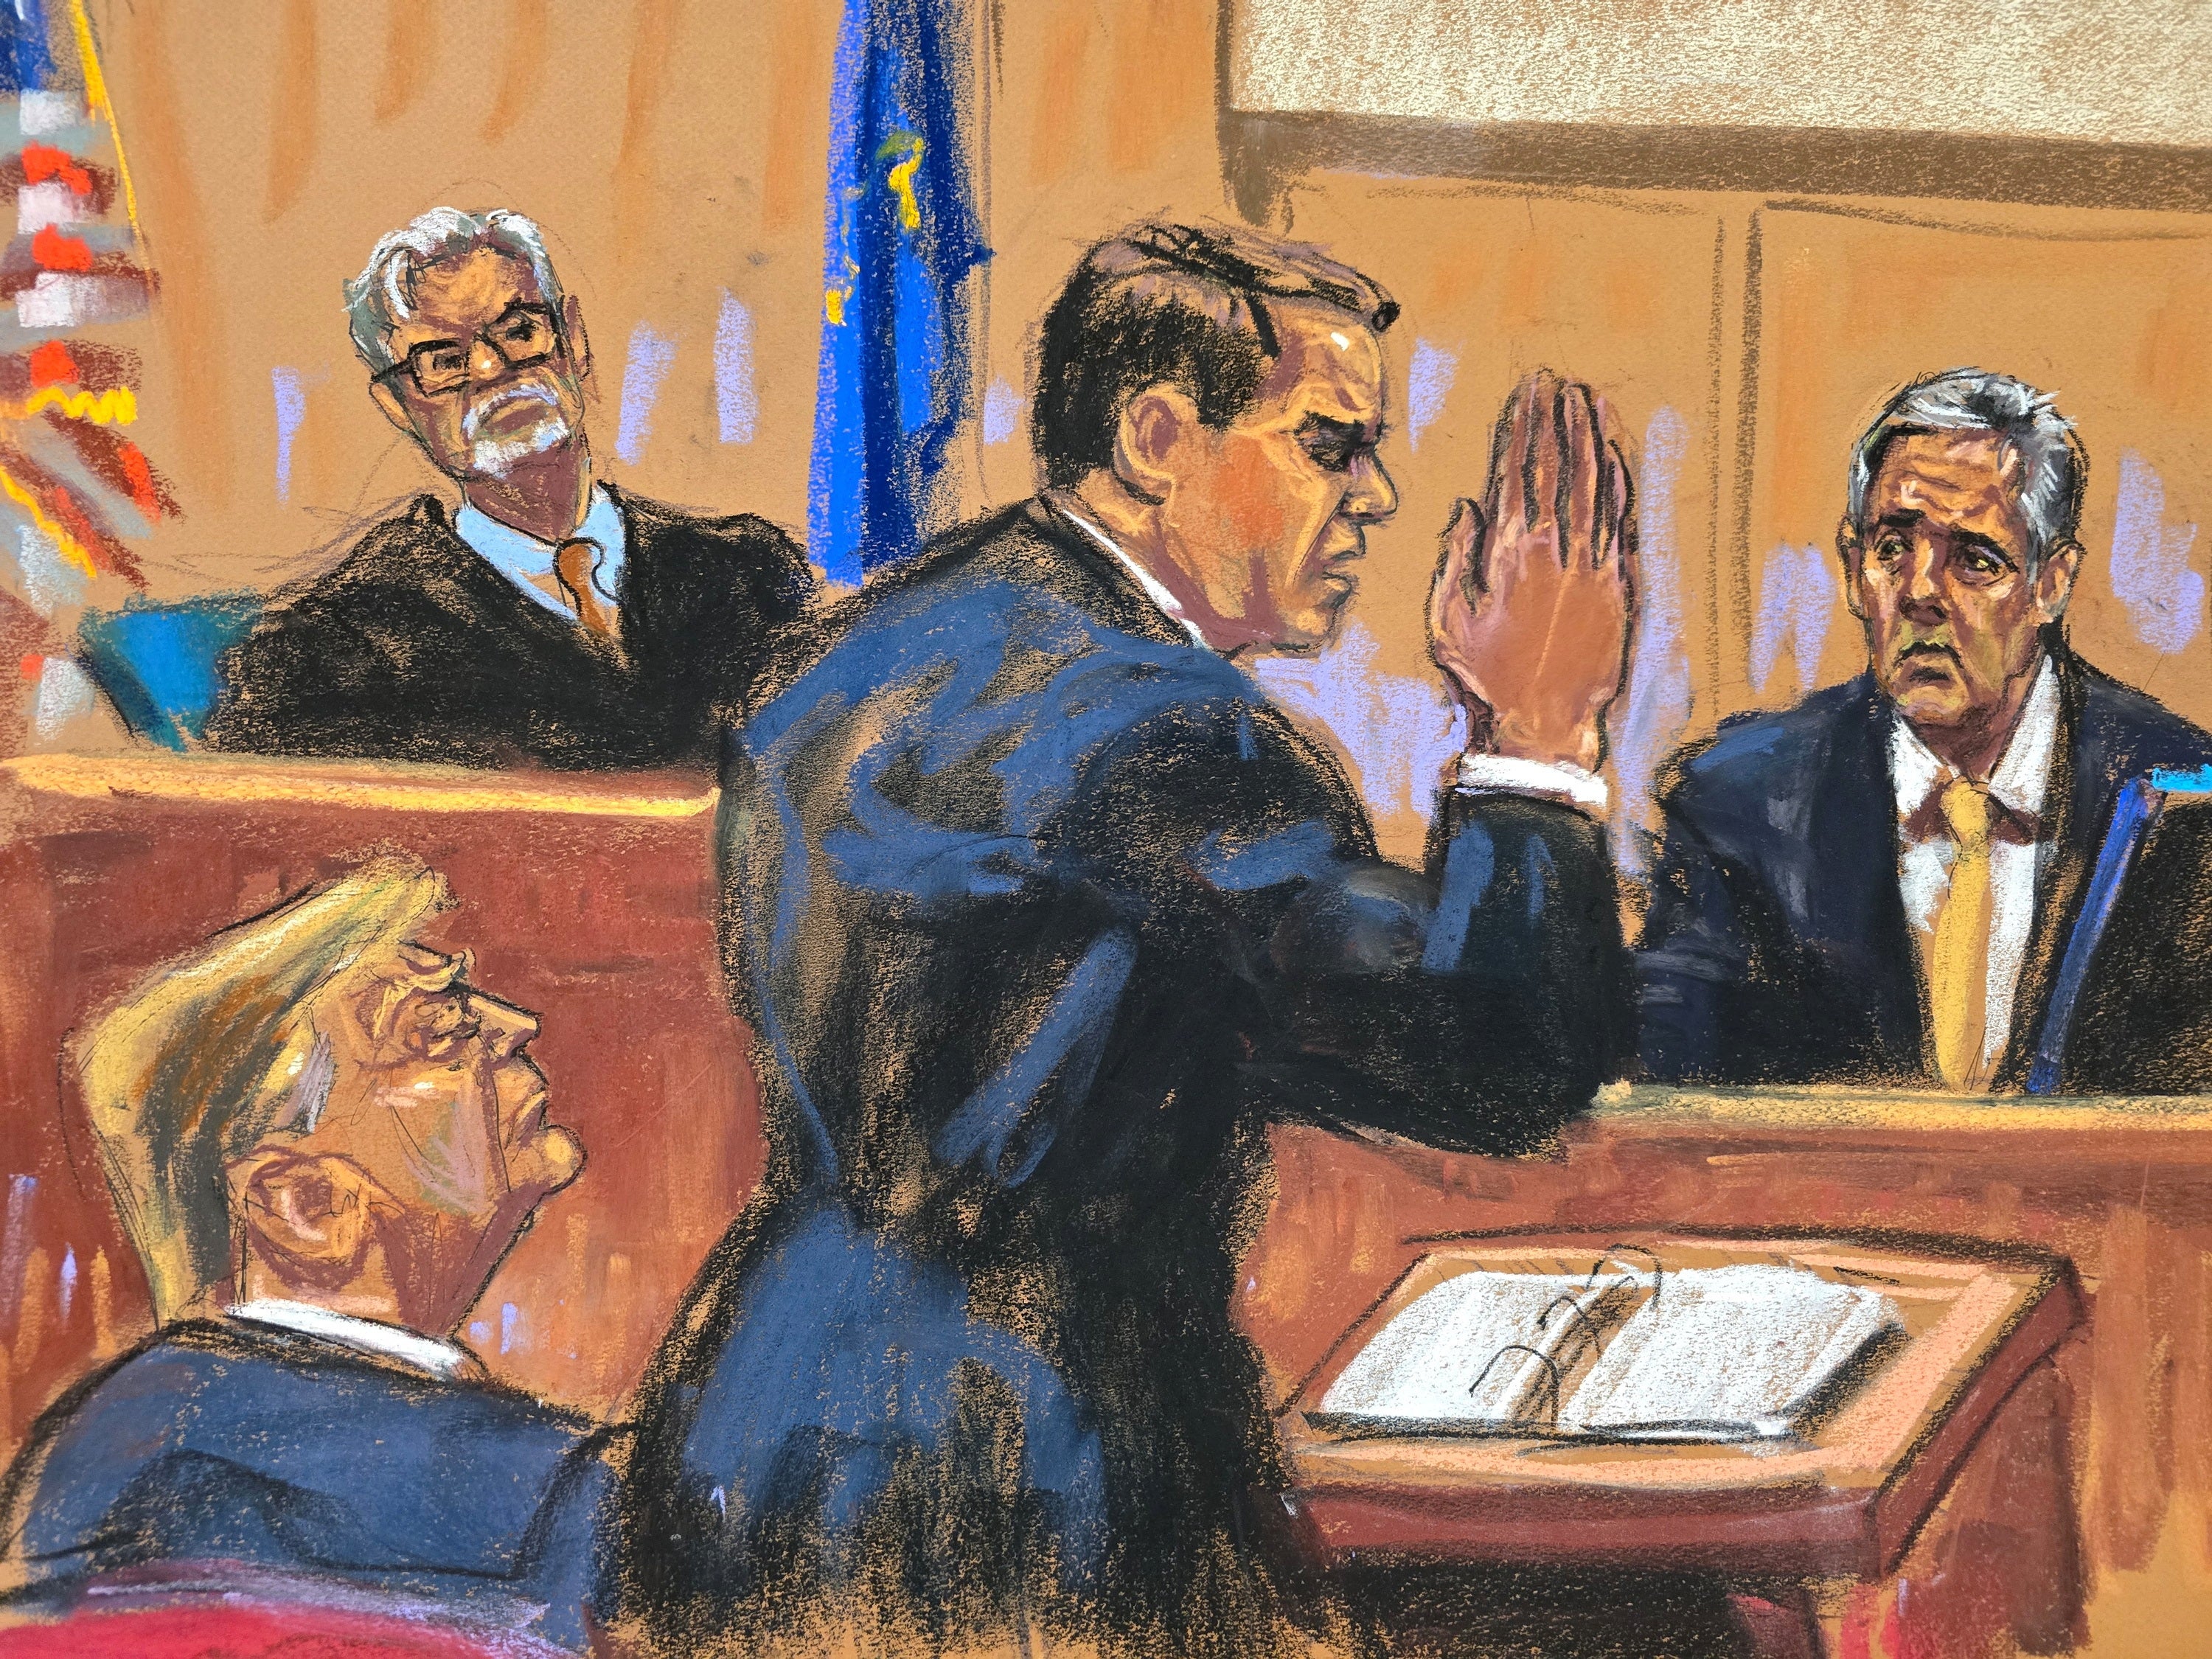 Michael Cohen is asked about taking an oath as he is cross-examined by defense lawyer Todd Blanche during former President Donald Trump’s criminal trial